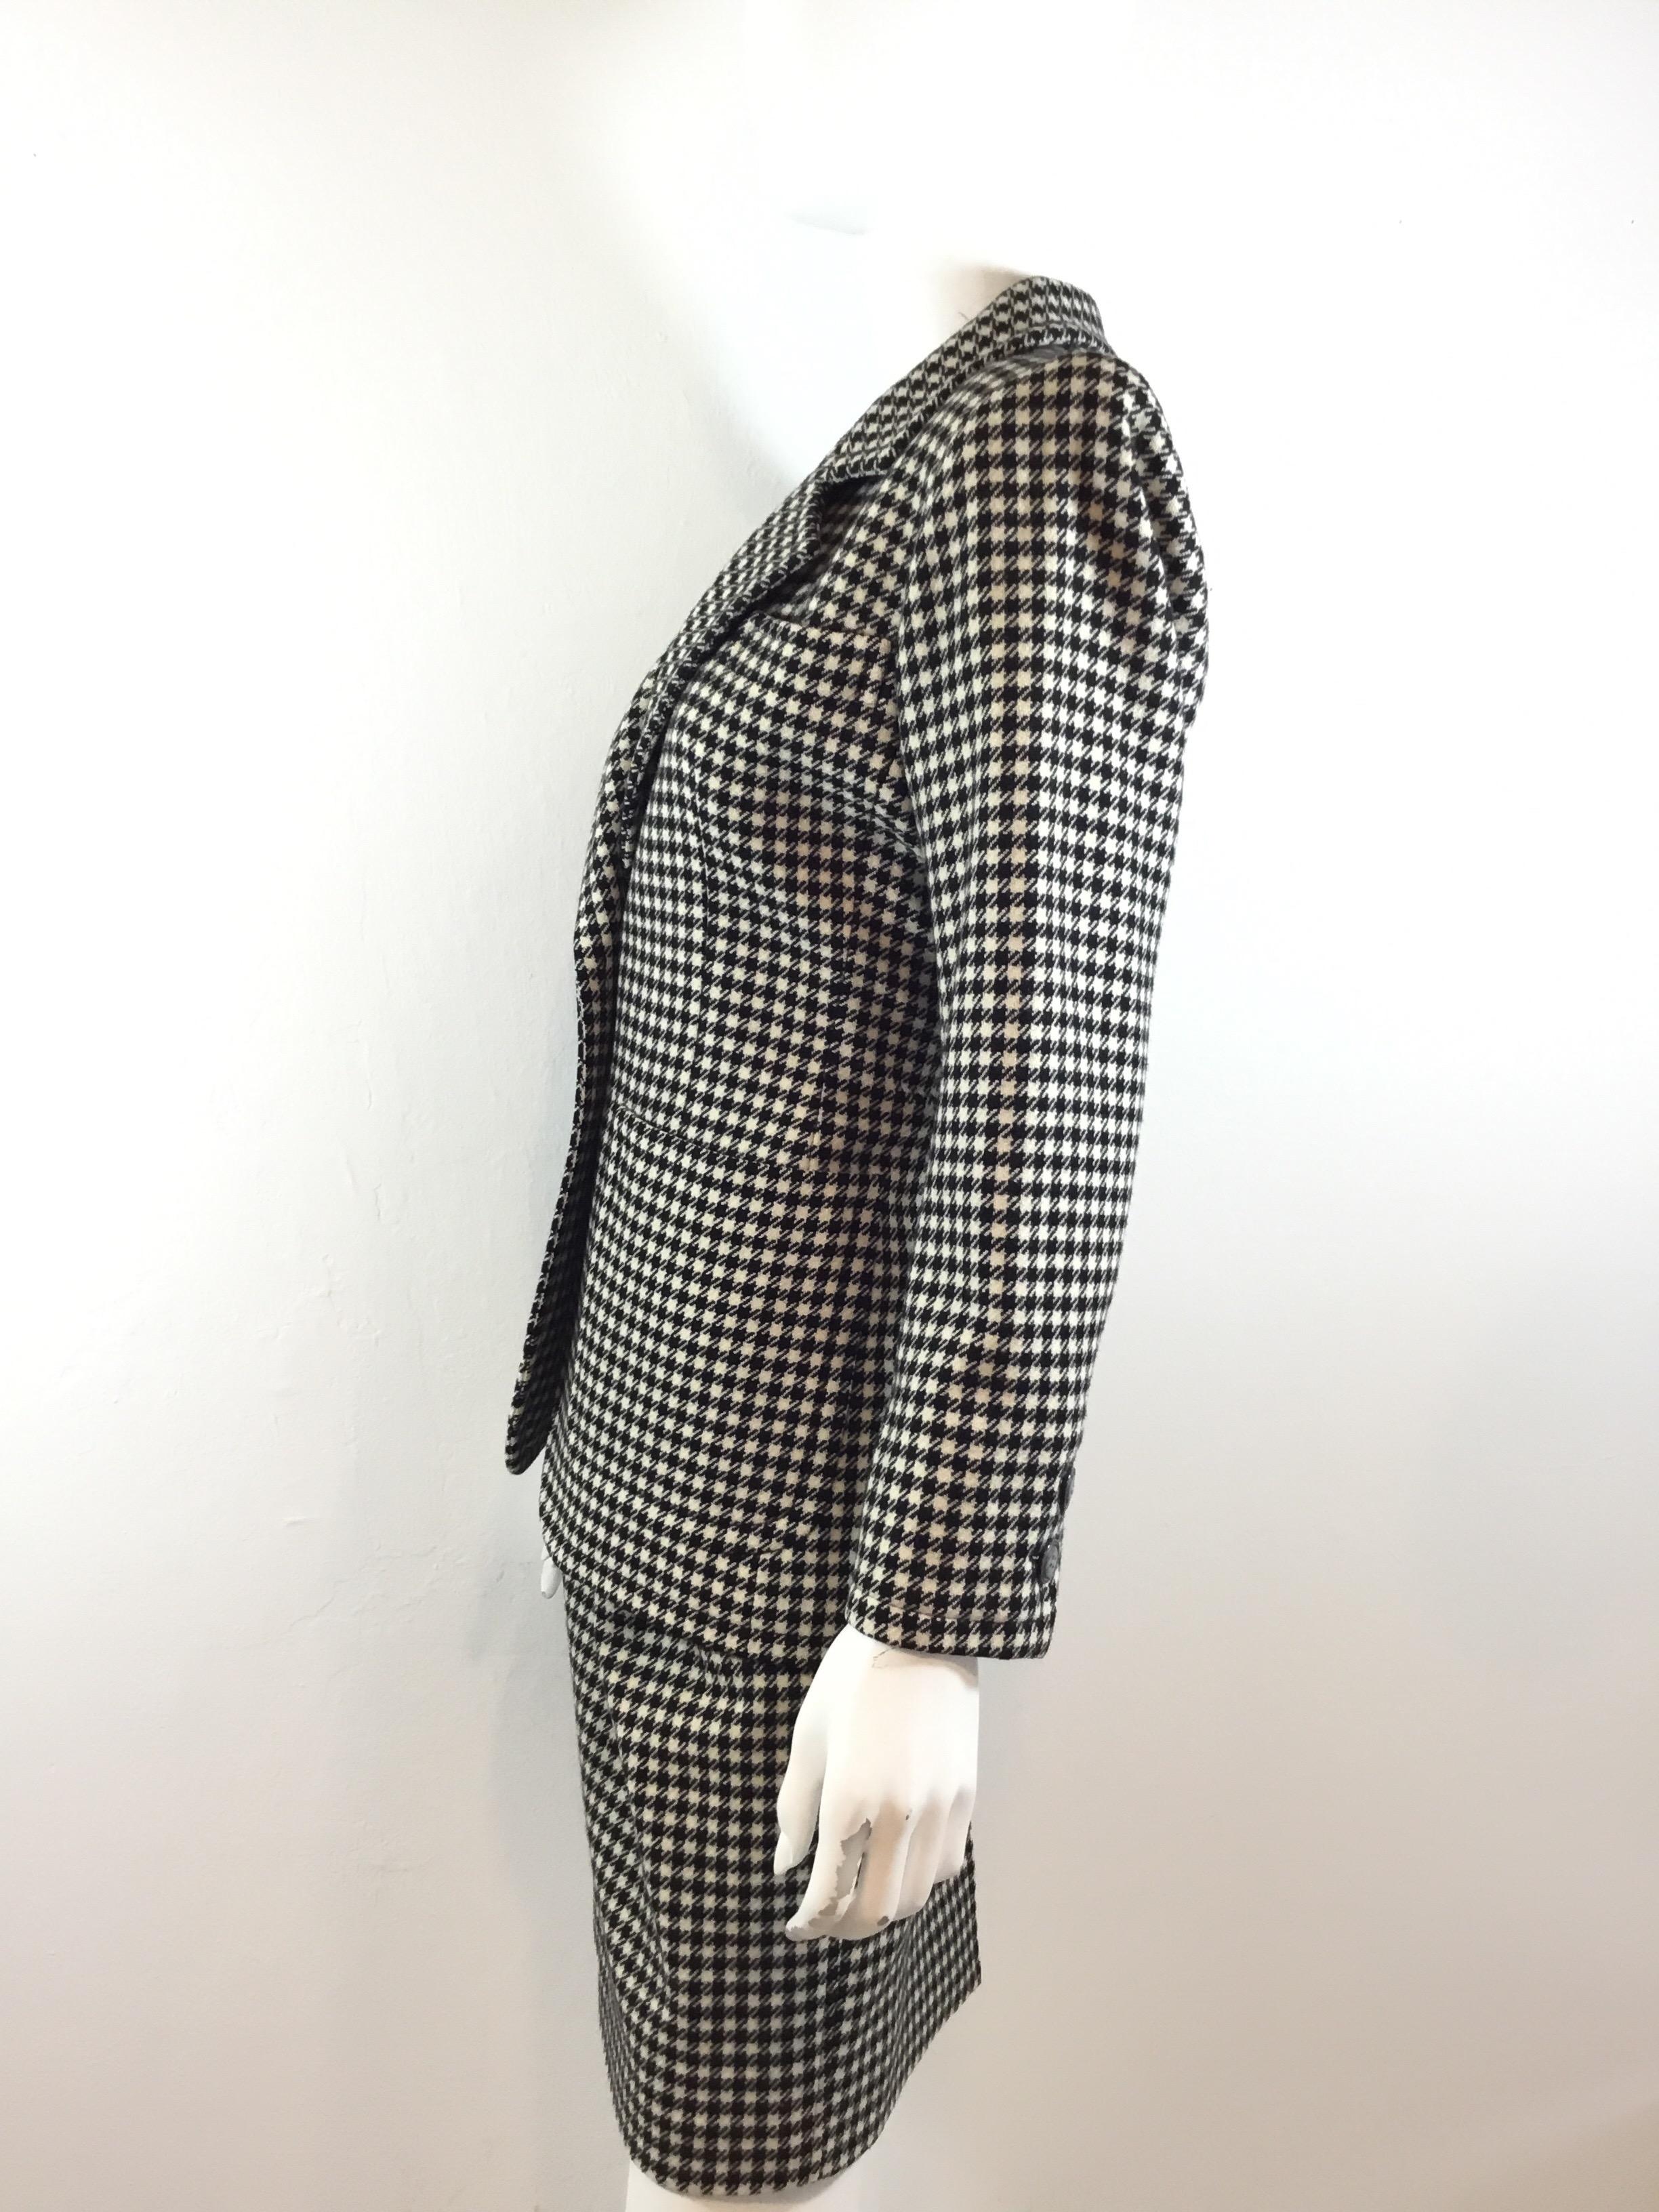 Vintage Yves Saint Laurent skirt suit featuring a Cream and black houndstooth pattern throughout. Jacket has button closures along the front and on the cuffs, and two slip pockets at the hem. Skirt has pockets at the hips and a sid zipper fastening.